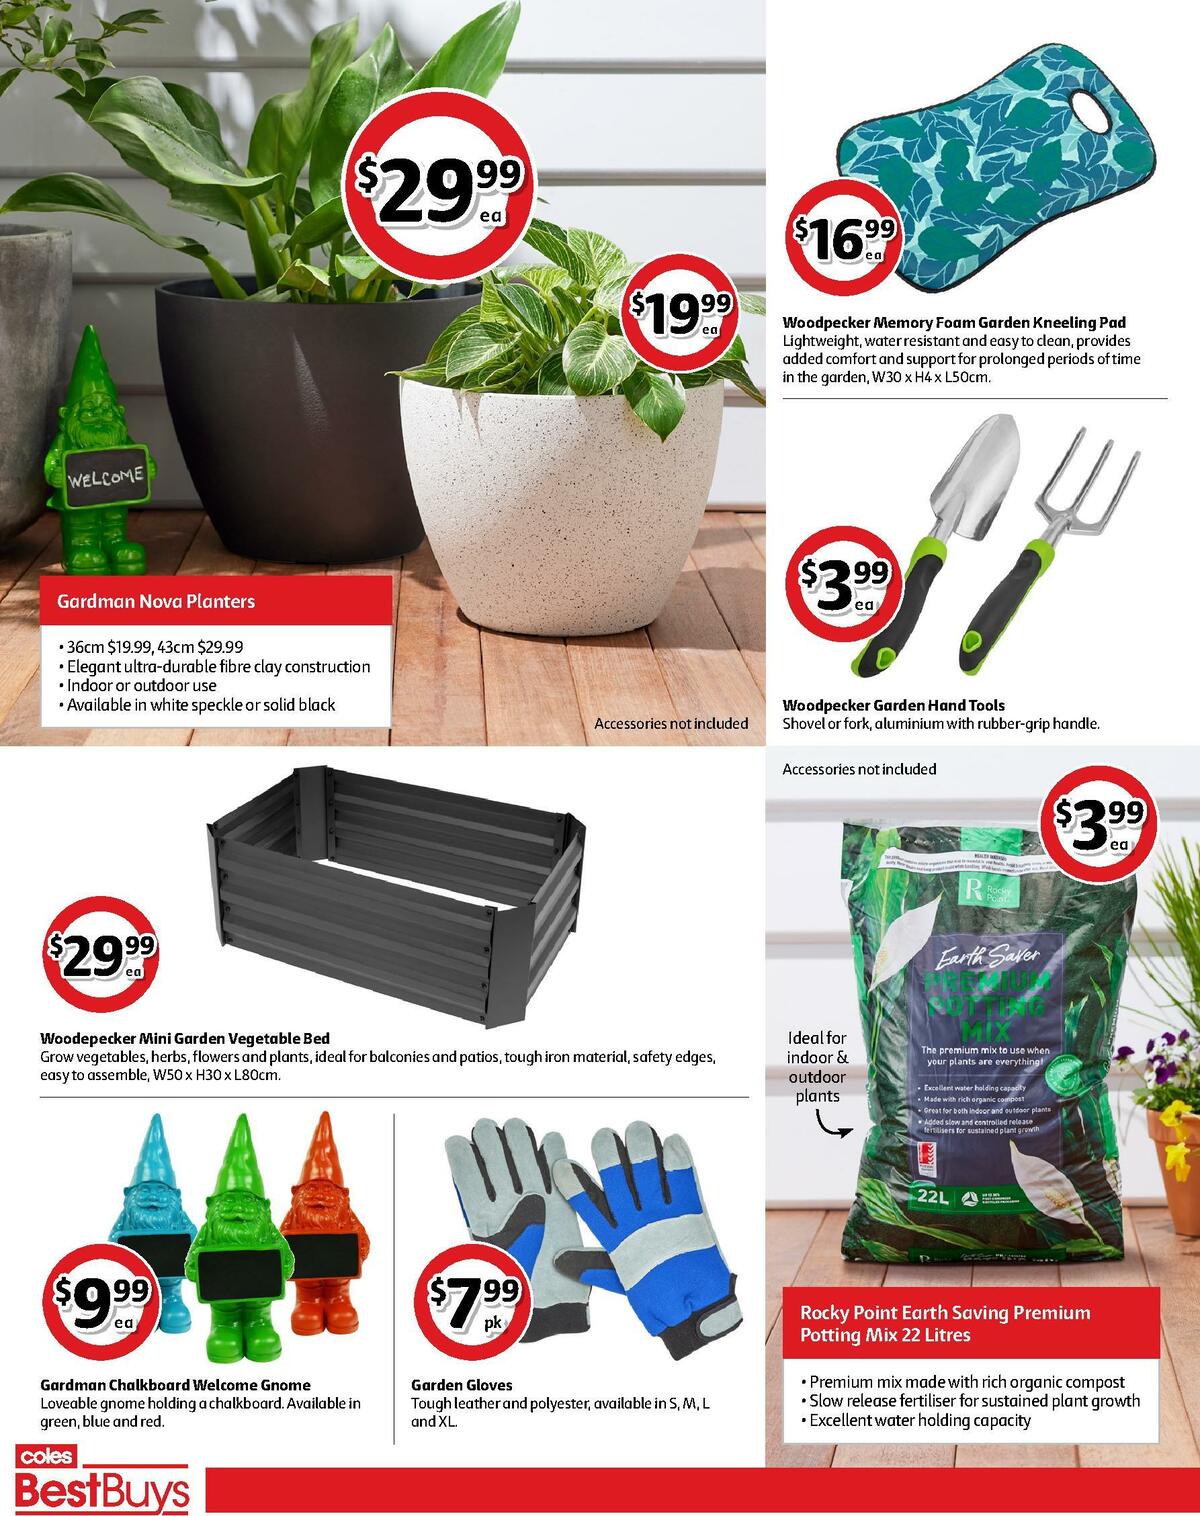 Coles Best Buys - Indoor Jungle & Garden Catalogues from 1 April